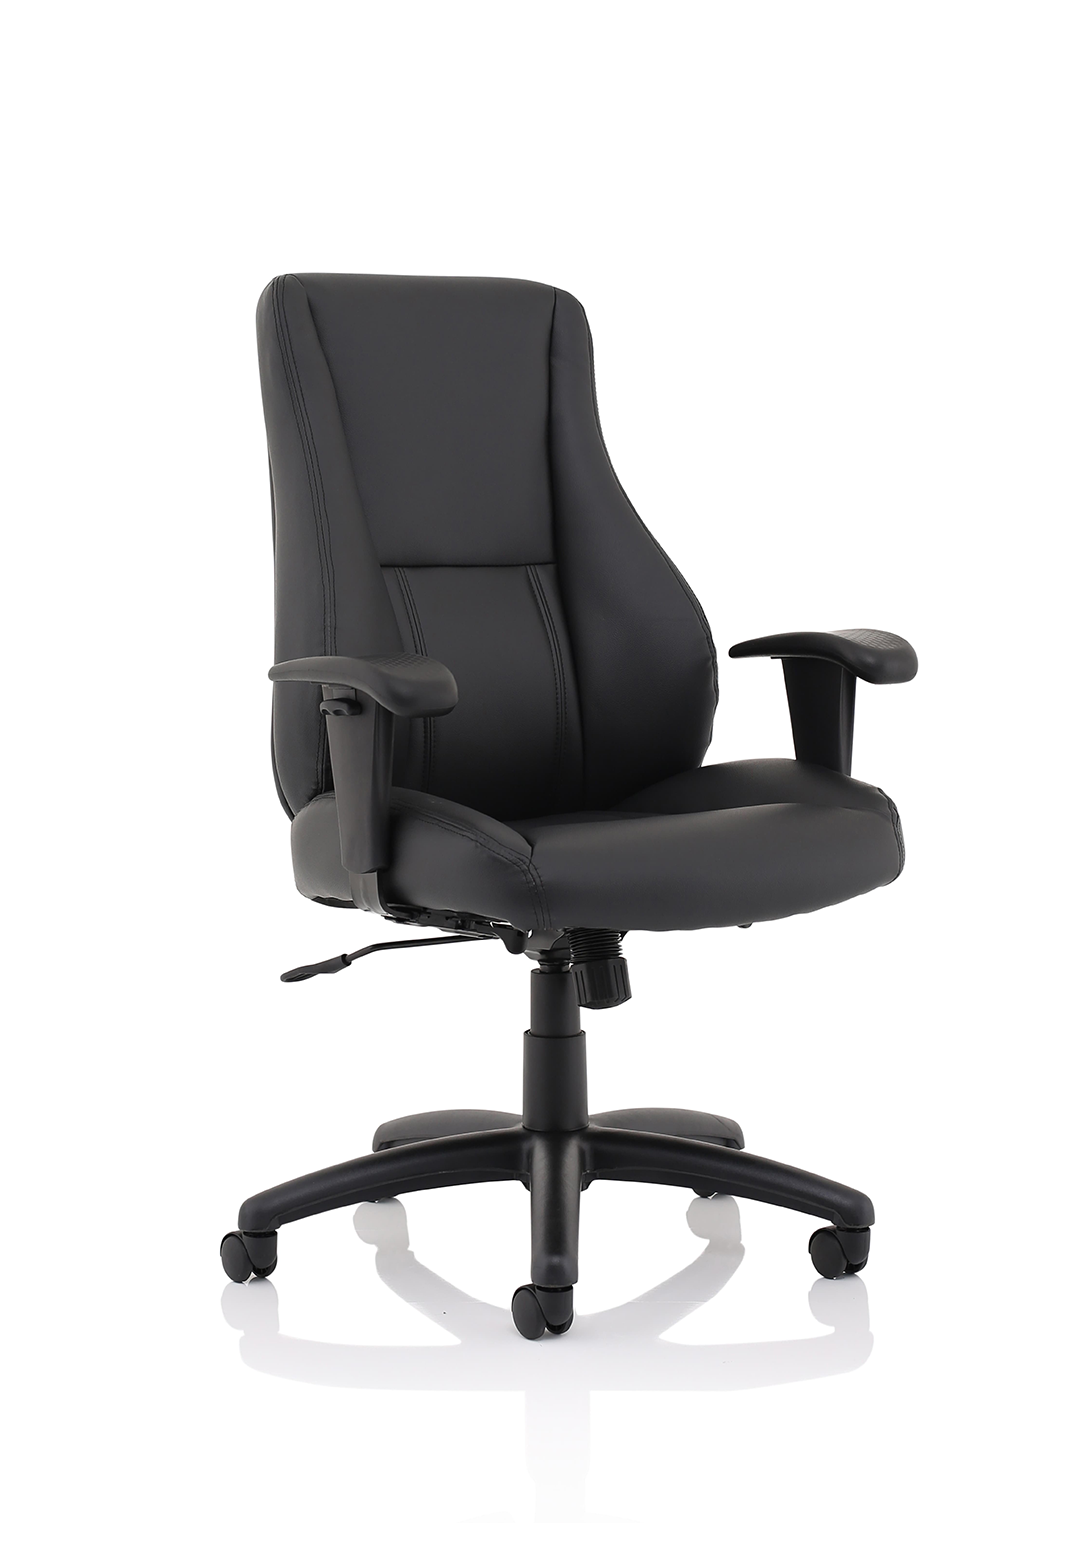 Winsor Leather Exec Home Office Chair | Executive Chair | Home Office Furniture | Leather Chair| Chrome detail | Swivel Chair | Leather Swivel Chair